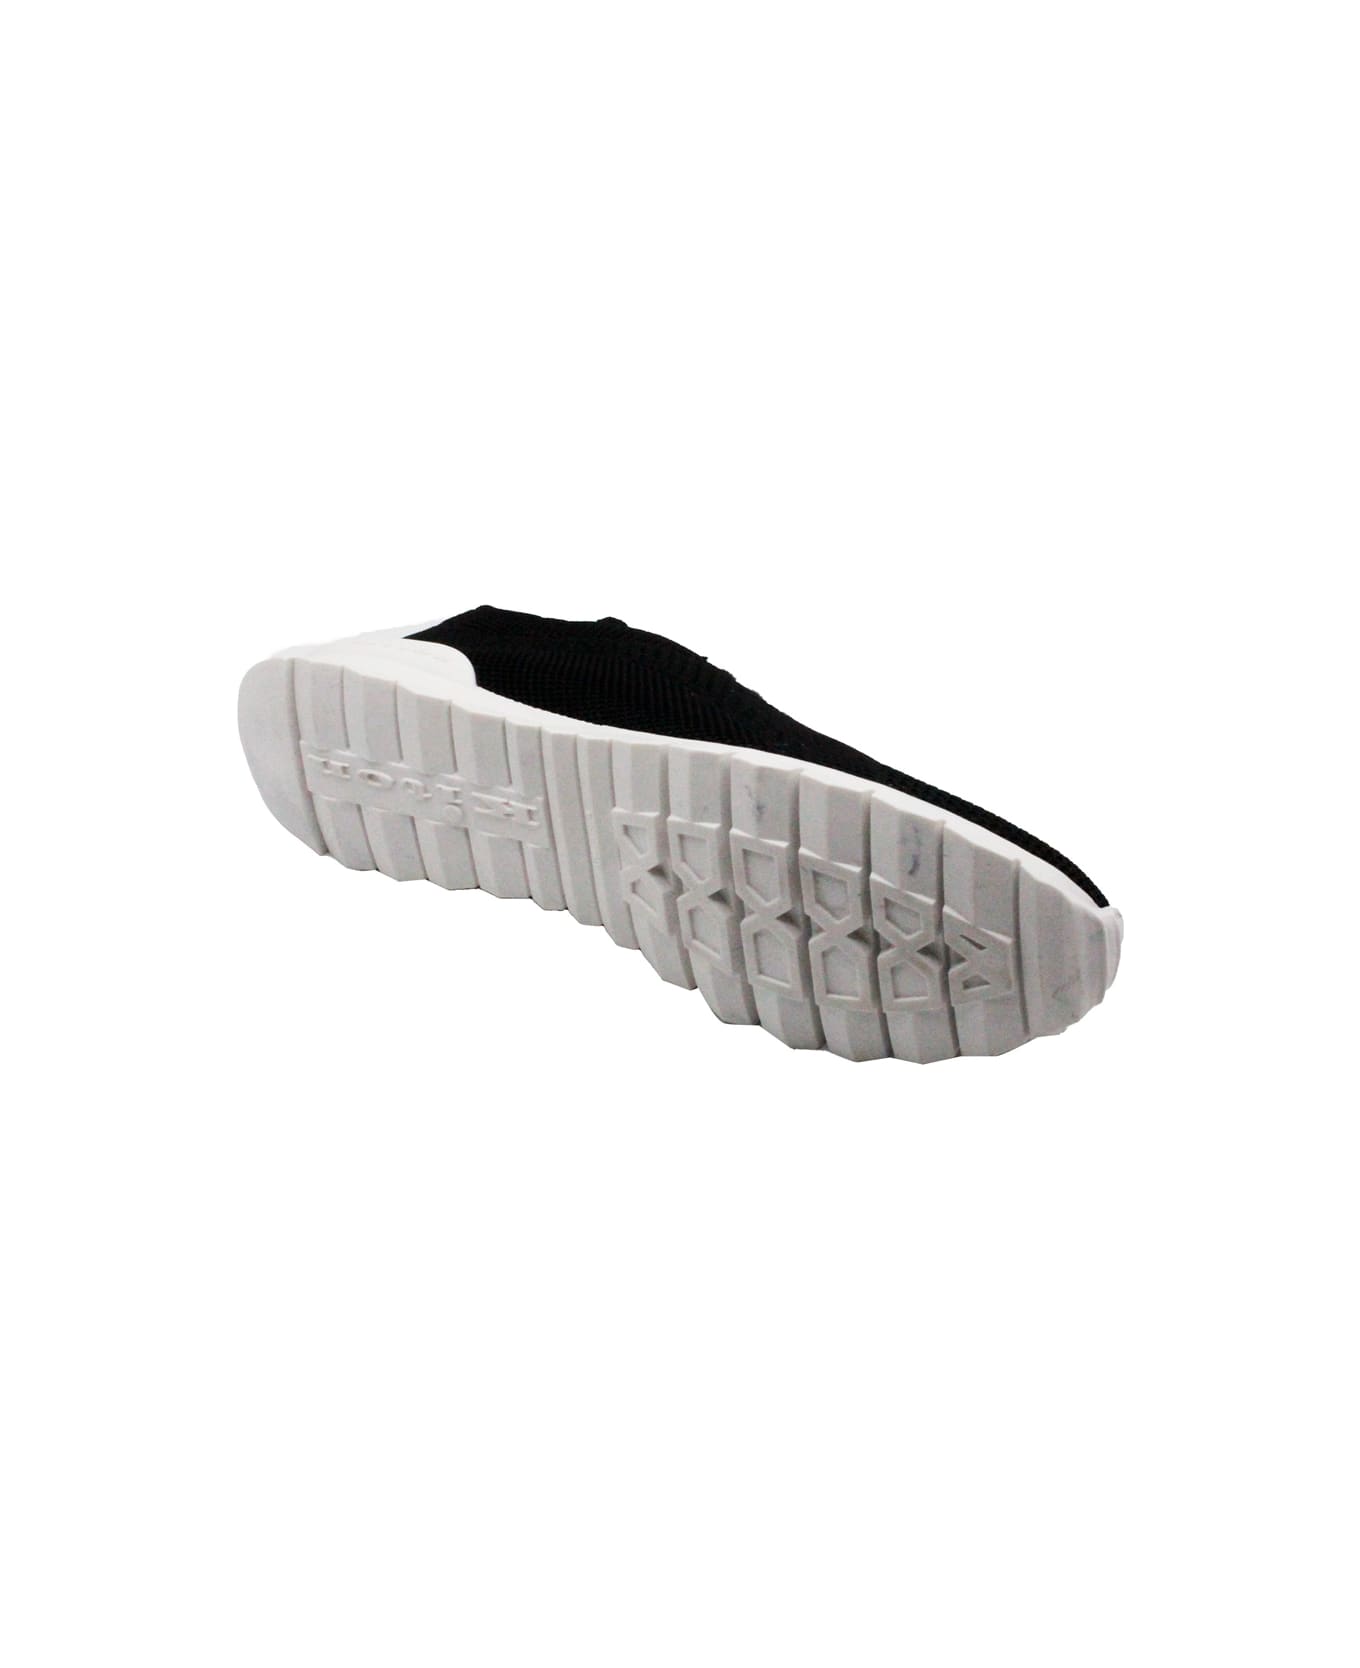 Kiton Sneakers Made Of Knitted Fabric. The Bottom, With A White Sole, Is Flexible And Extralight; The Elastic Tongue Ensures Greater Comfort. Logo - Black